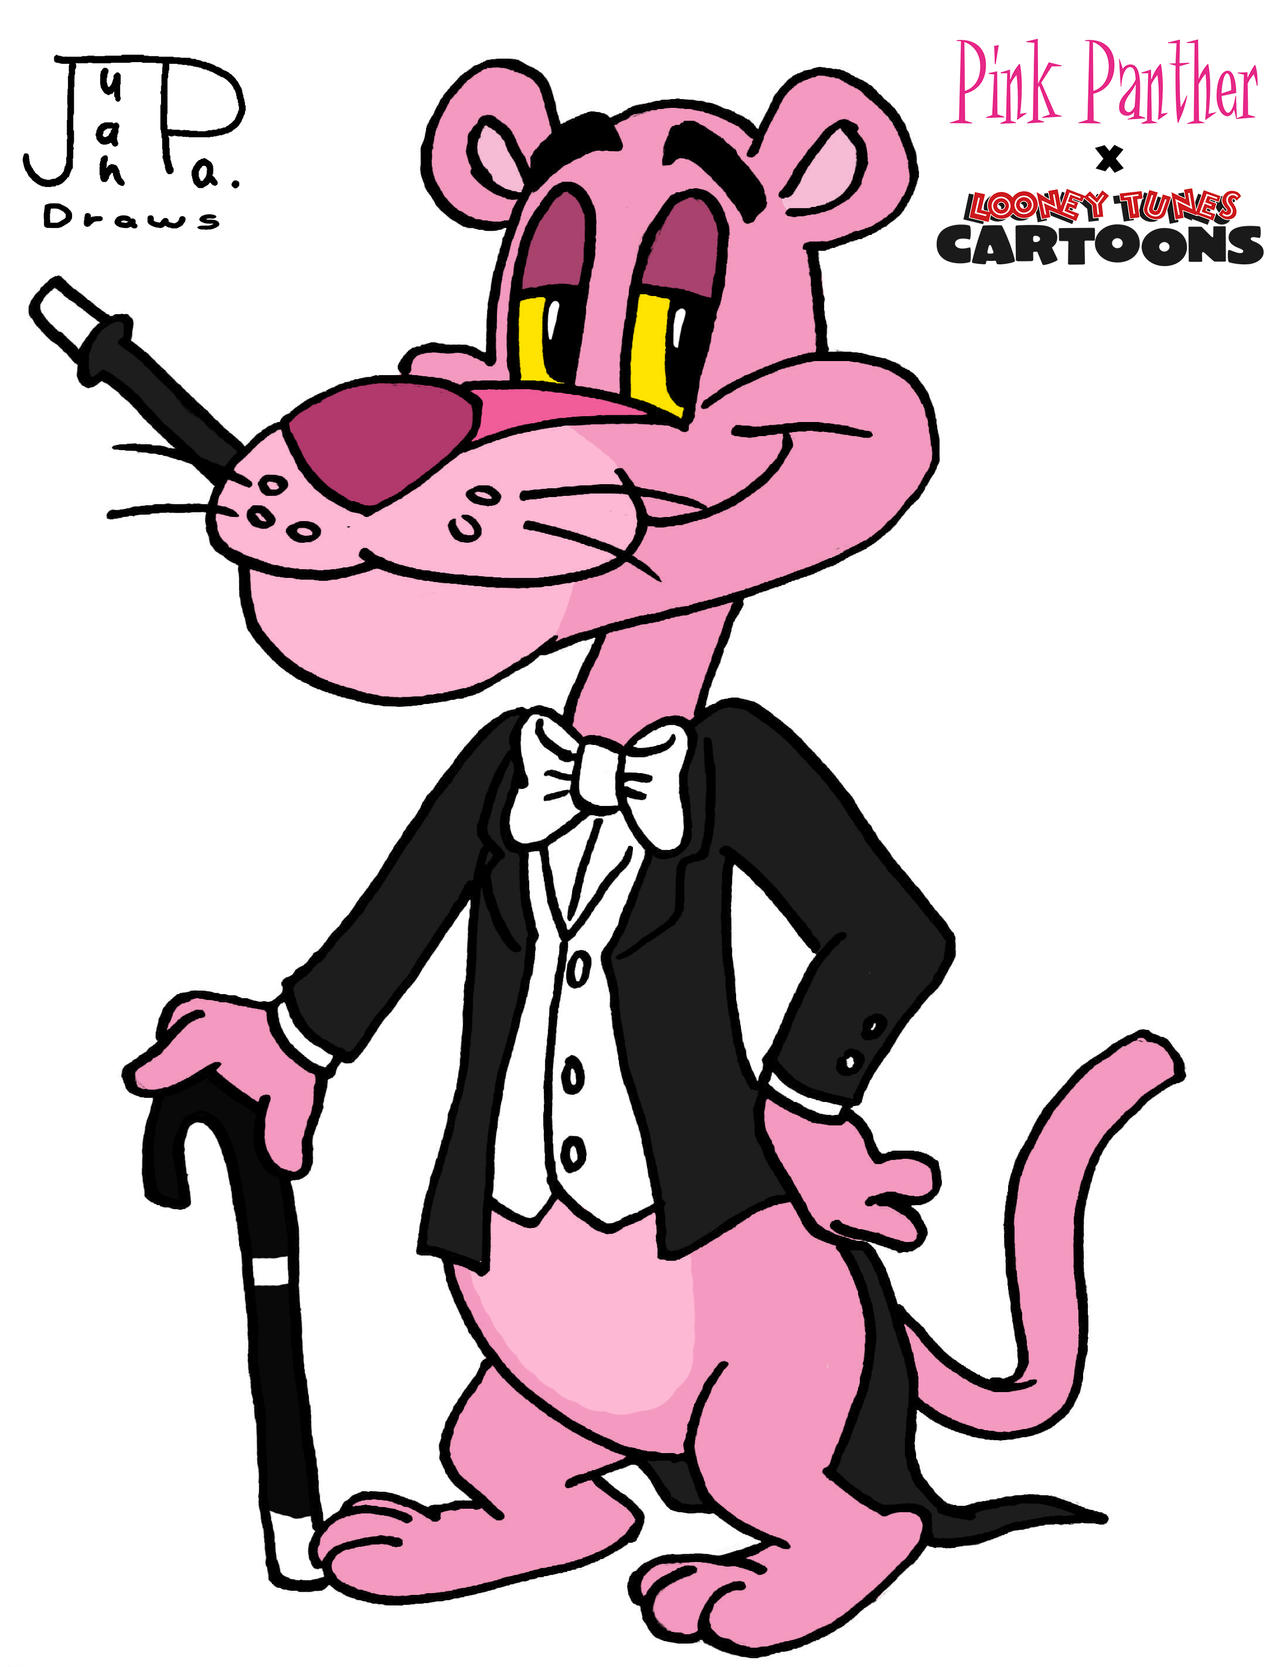 The Pink Panther in Looney Tunes Cartoons Style by JuanpaDraws on DeviantArt